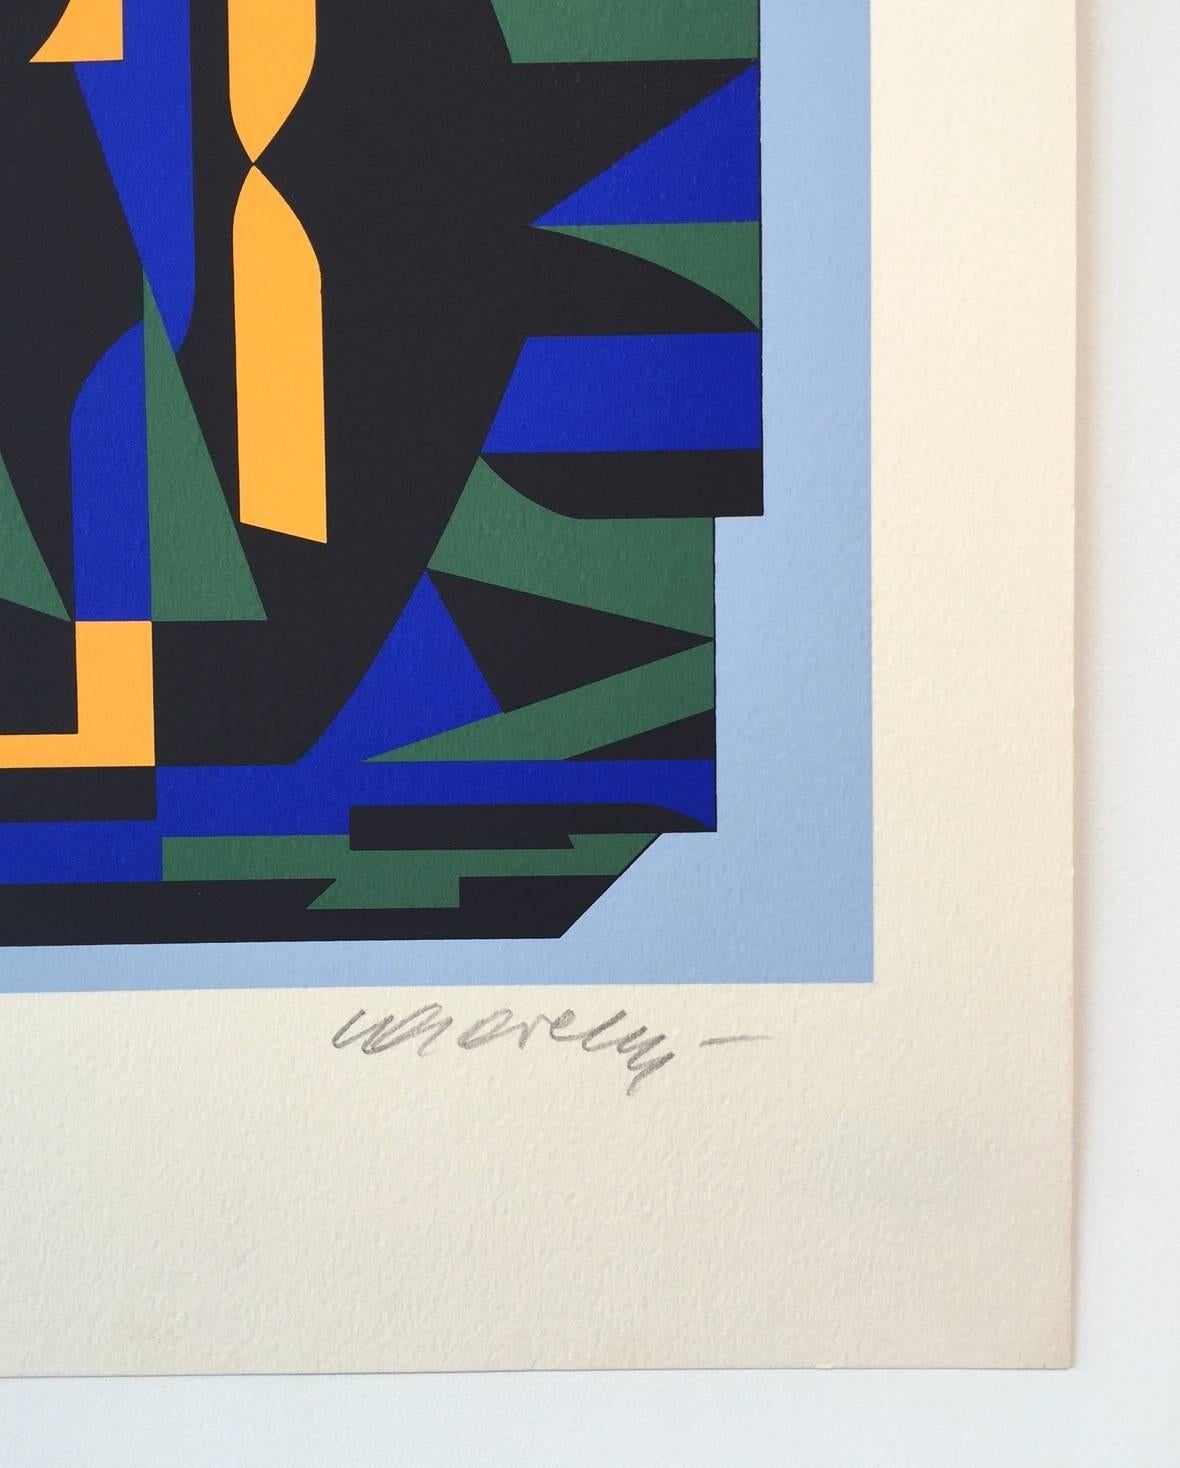 TECHNICAL INFORMATION:

Victor Vasarely
Risir, from Ion Album
1989
Screenprint
14 x 11 in.
Epreuve D'Artist (E.A.)
Pencil signed and numbered

Accompanied with COA by Gregg Shienbaum Fine Art. 

Condition: This work is in excellent condition. It has